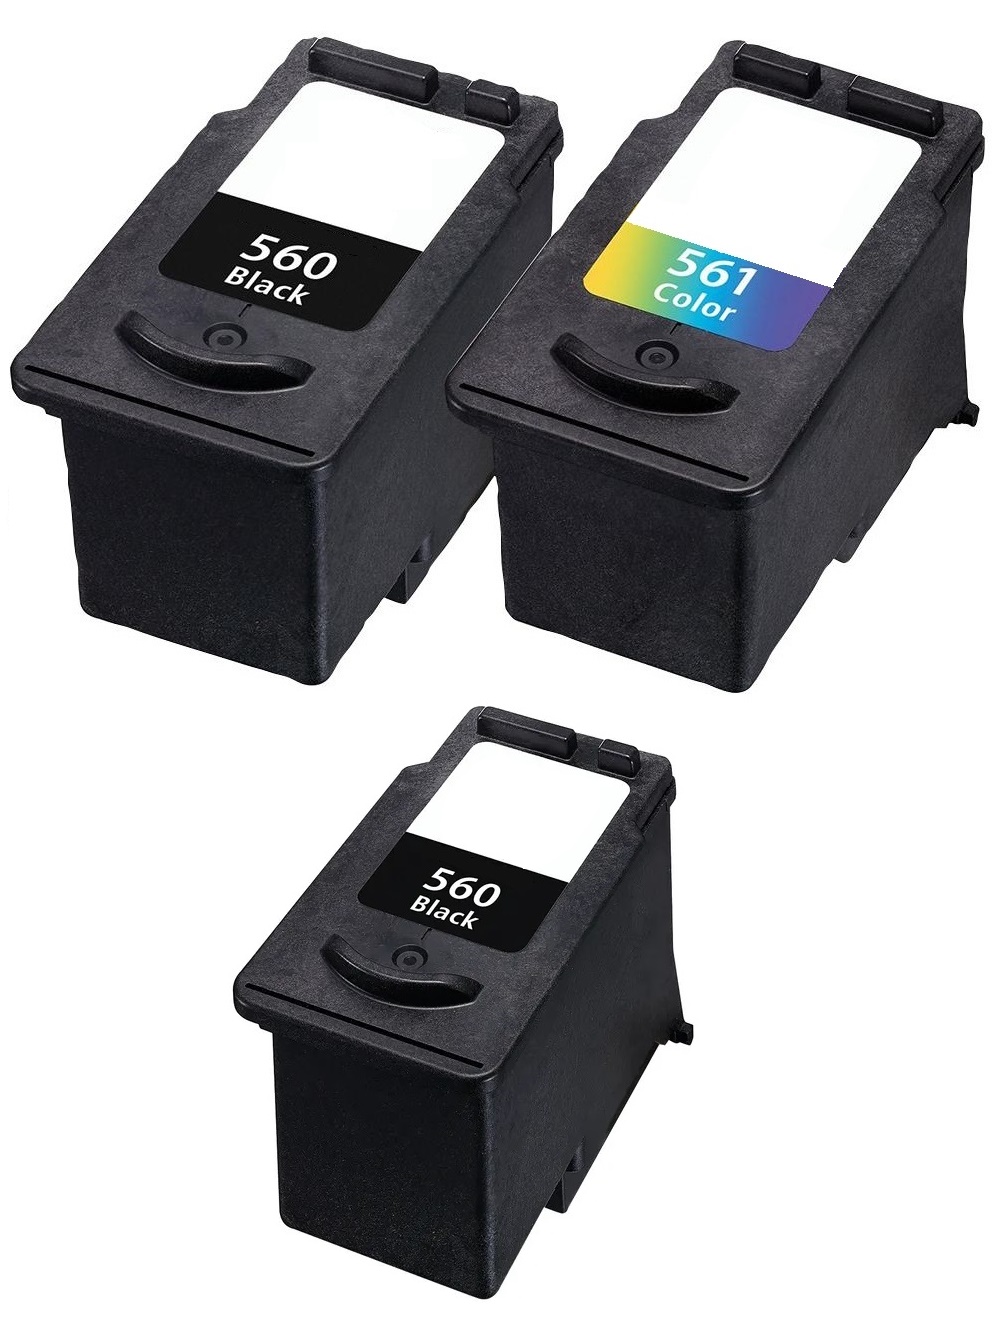 Remanufactured 2 x Canon PG-560 and 1 x CL-561 Black and Colour Ink Cartridges